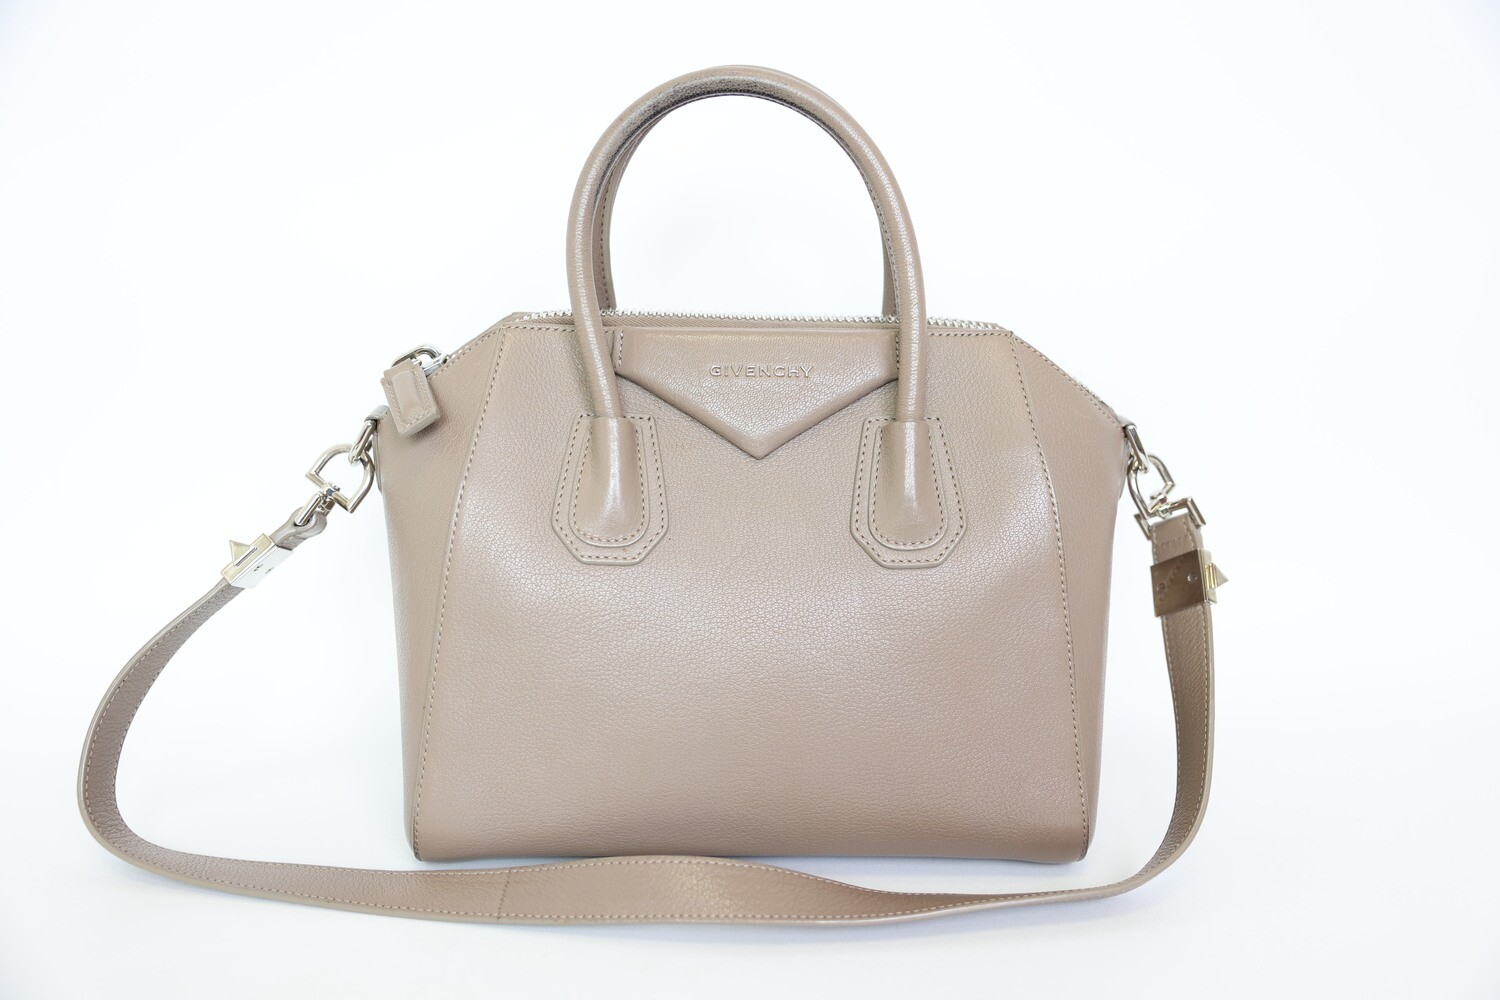 Givenchy Antigona Bag Small, Taupe Leather With Silver Hardware, Preowned In Dustbag WA001